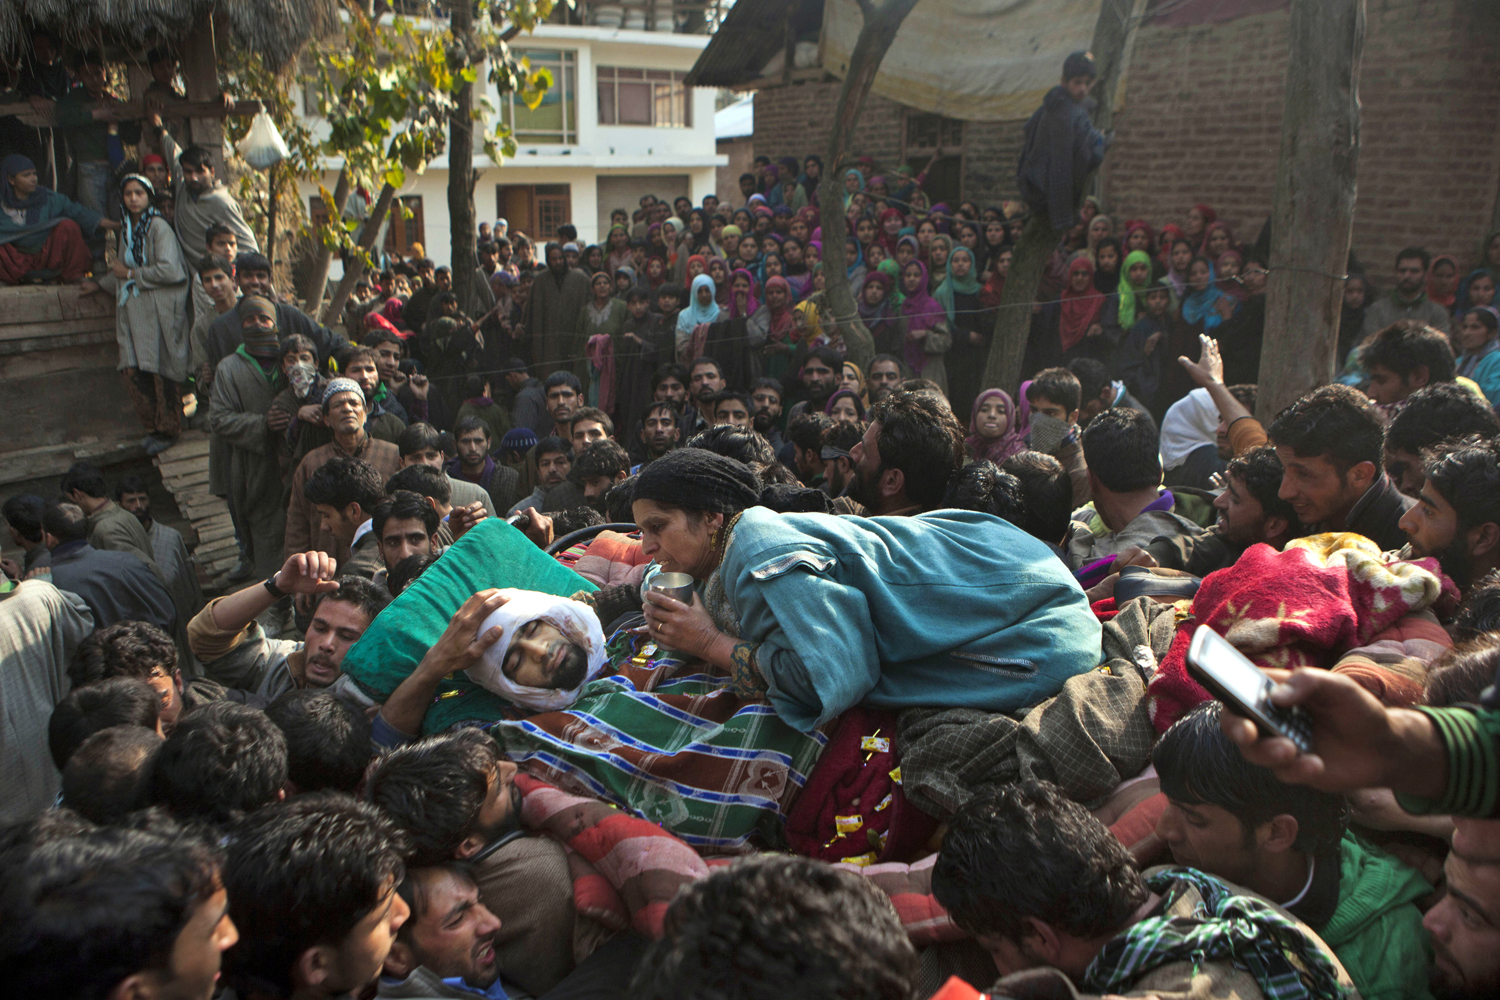 Image: Nov. 14, 2012. The mother of Shabir Ahmed Mir, a suspected militant of Lashkar-e-Taiba, holds a glass of milk as she clings to the bed carrying the body of her son during his funeral procession in Chingam, India.